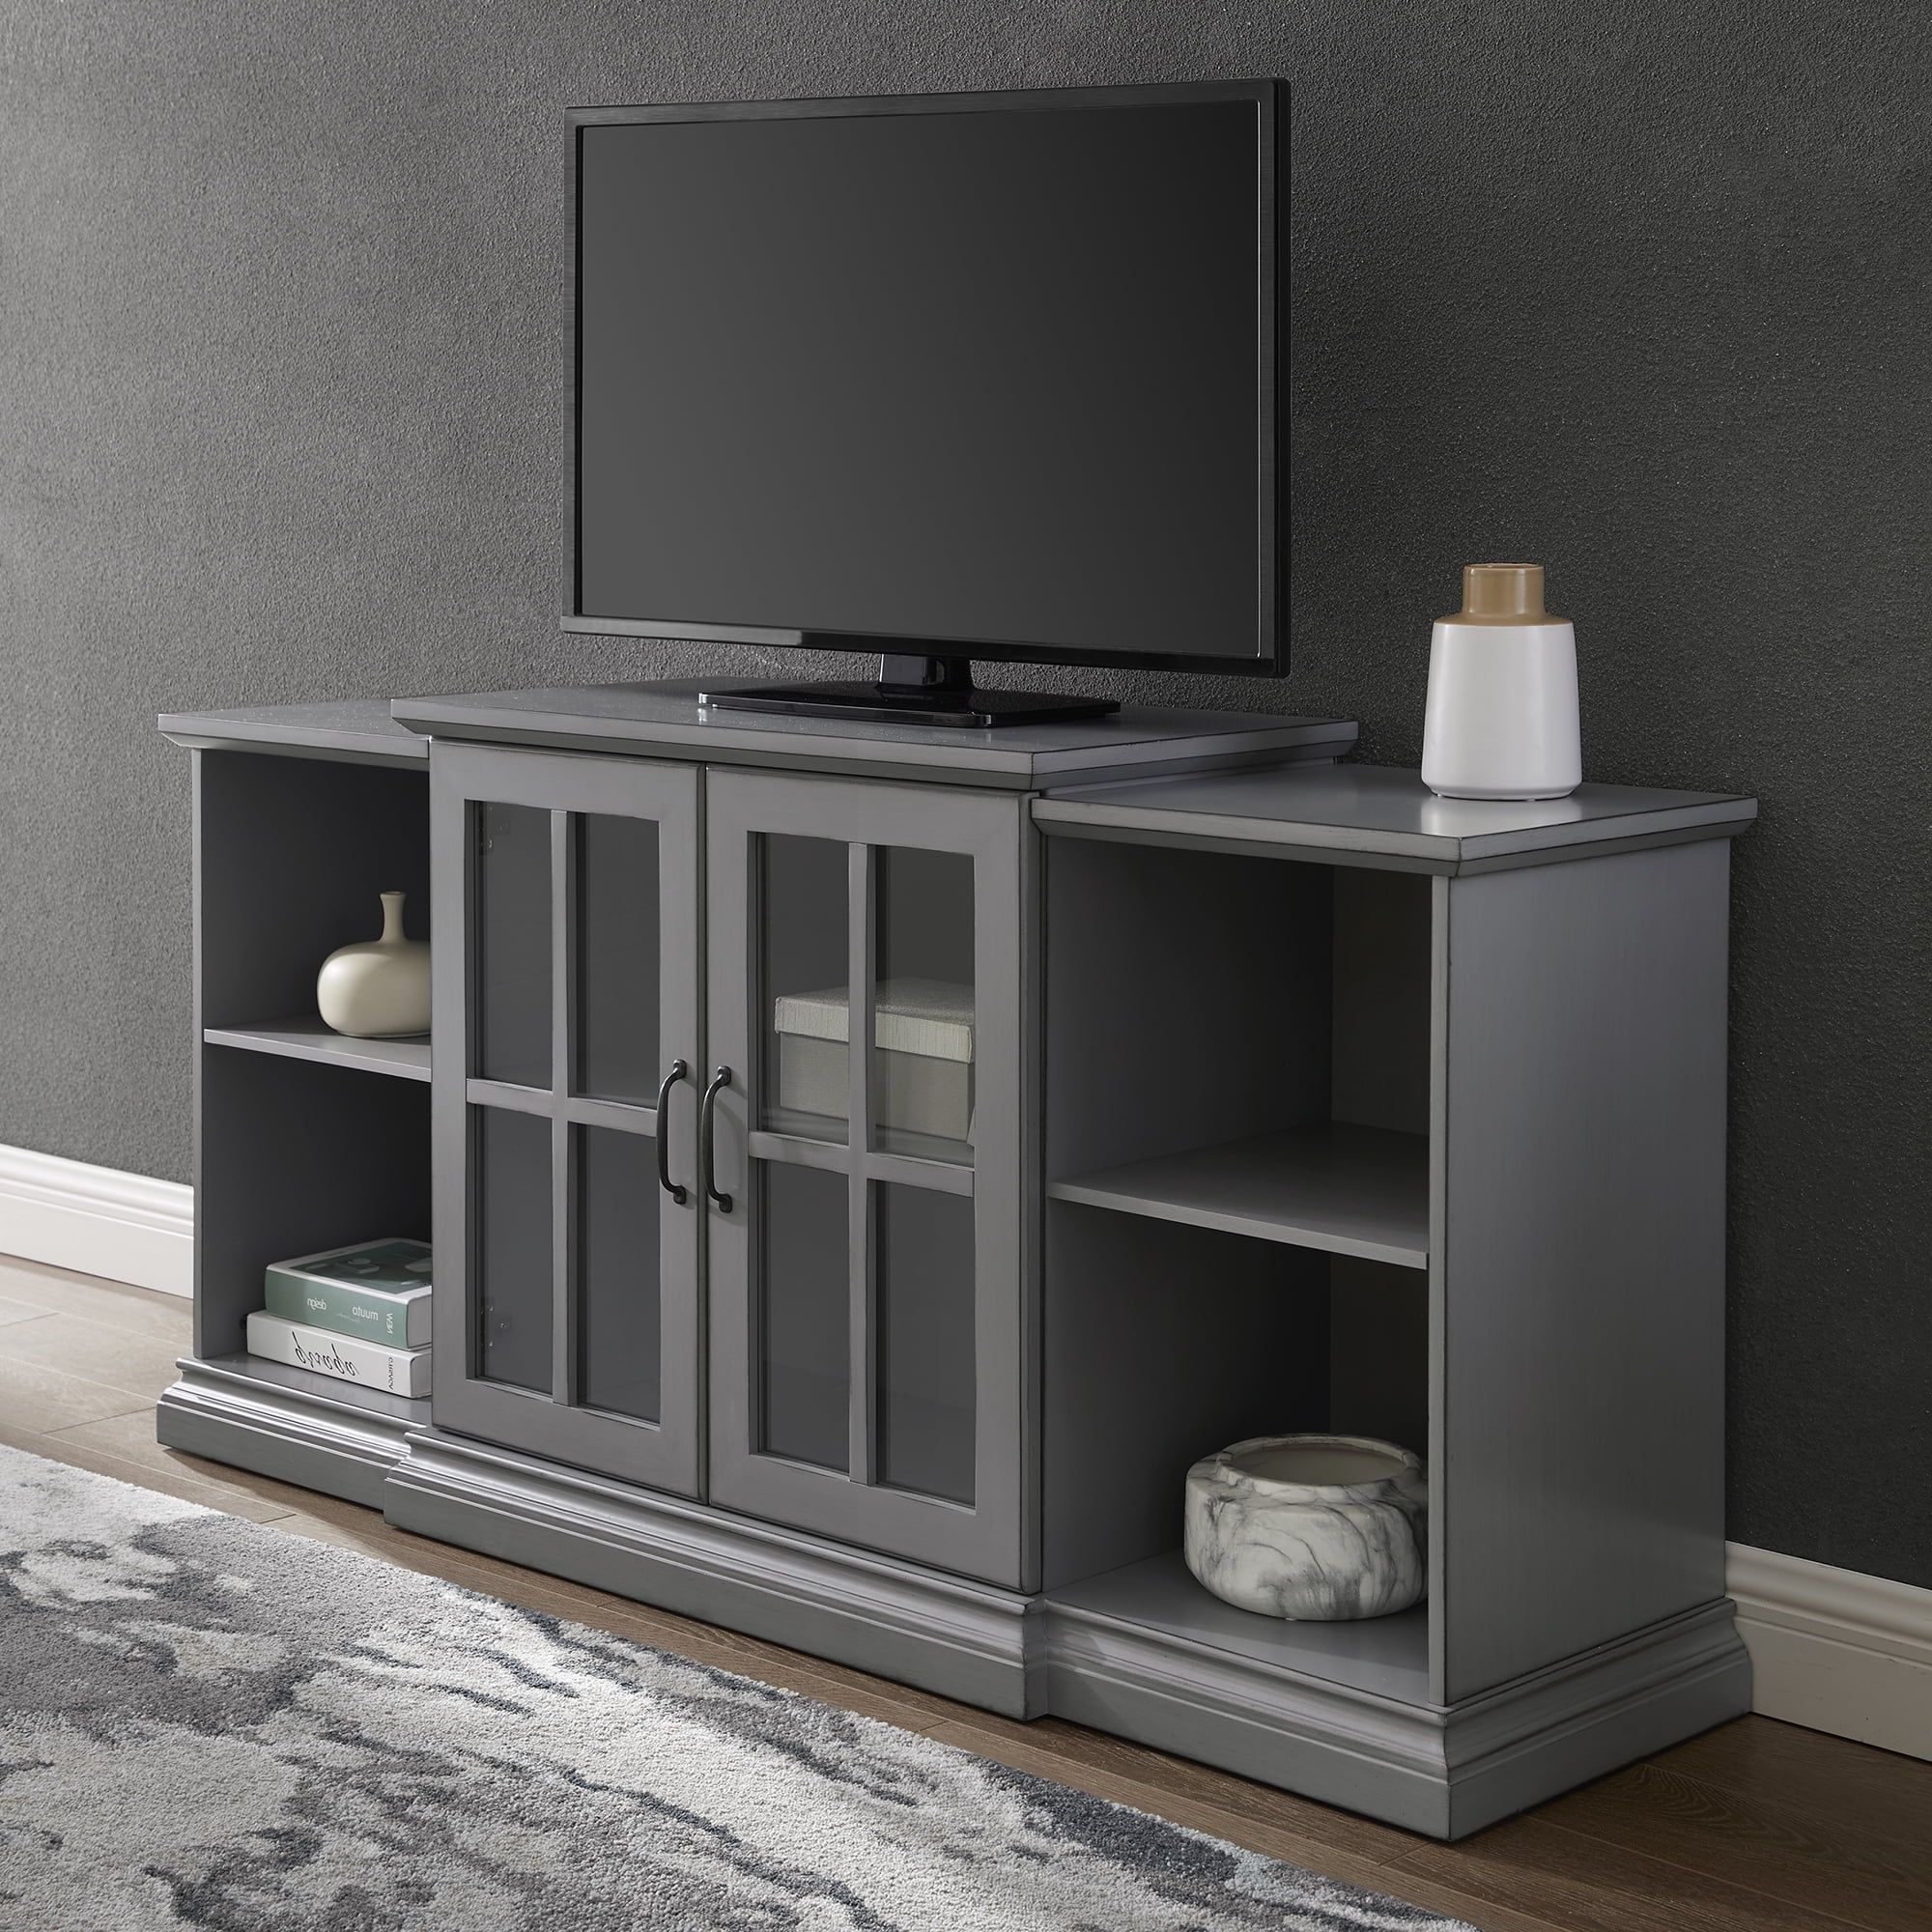 Trendy Tier Stands For Tvs Intended For Manor Park Classic Tiered Tv Stand For Tvs Up To 65", Antique Grey (View 5 of 15)